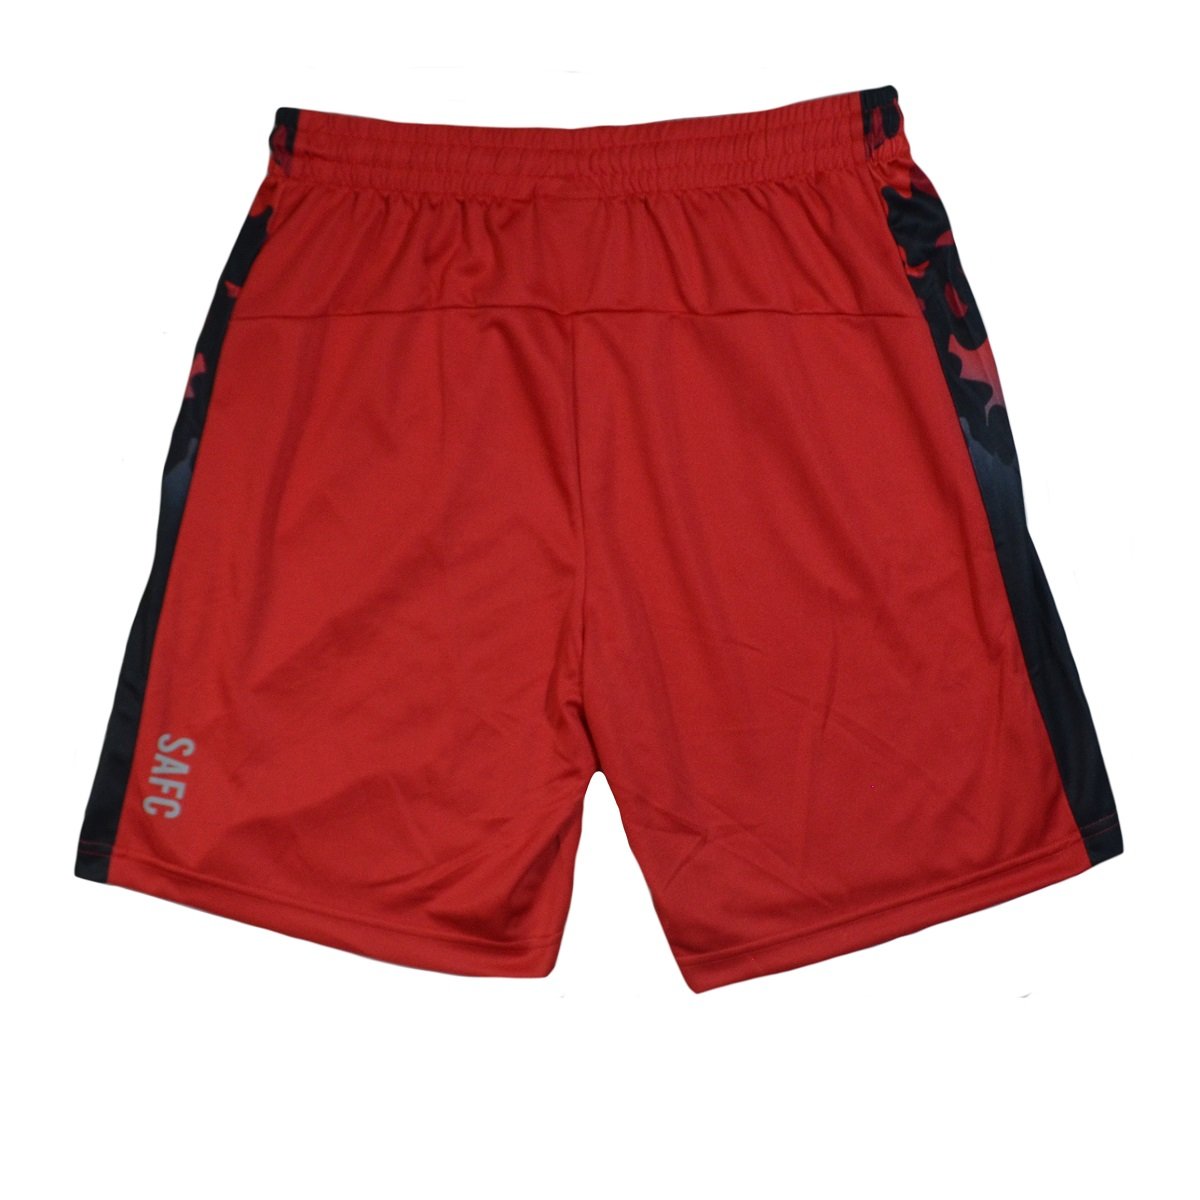 Buy the SAFC RAWA Short online at Sunderland AFC Store